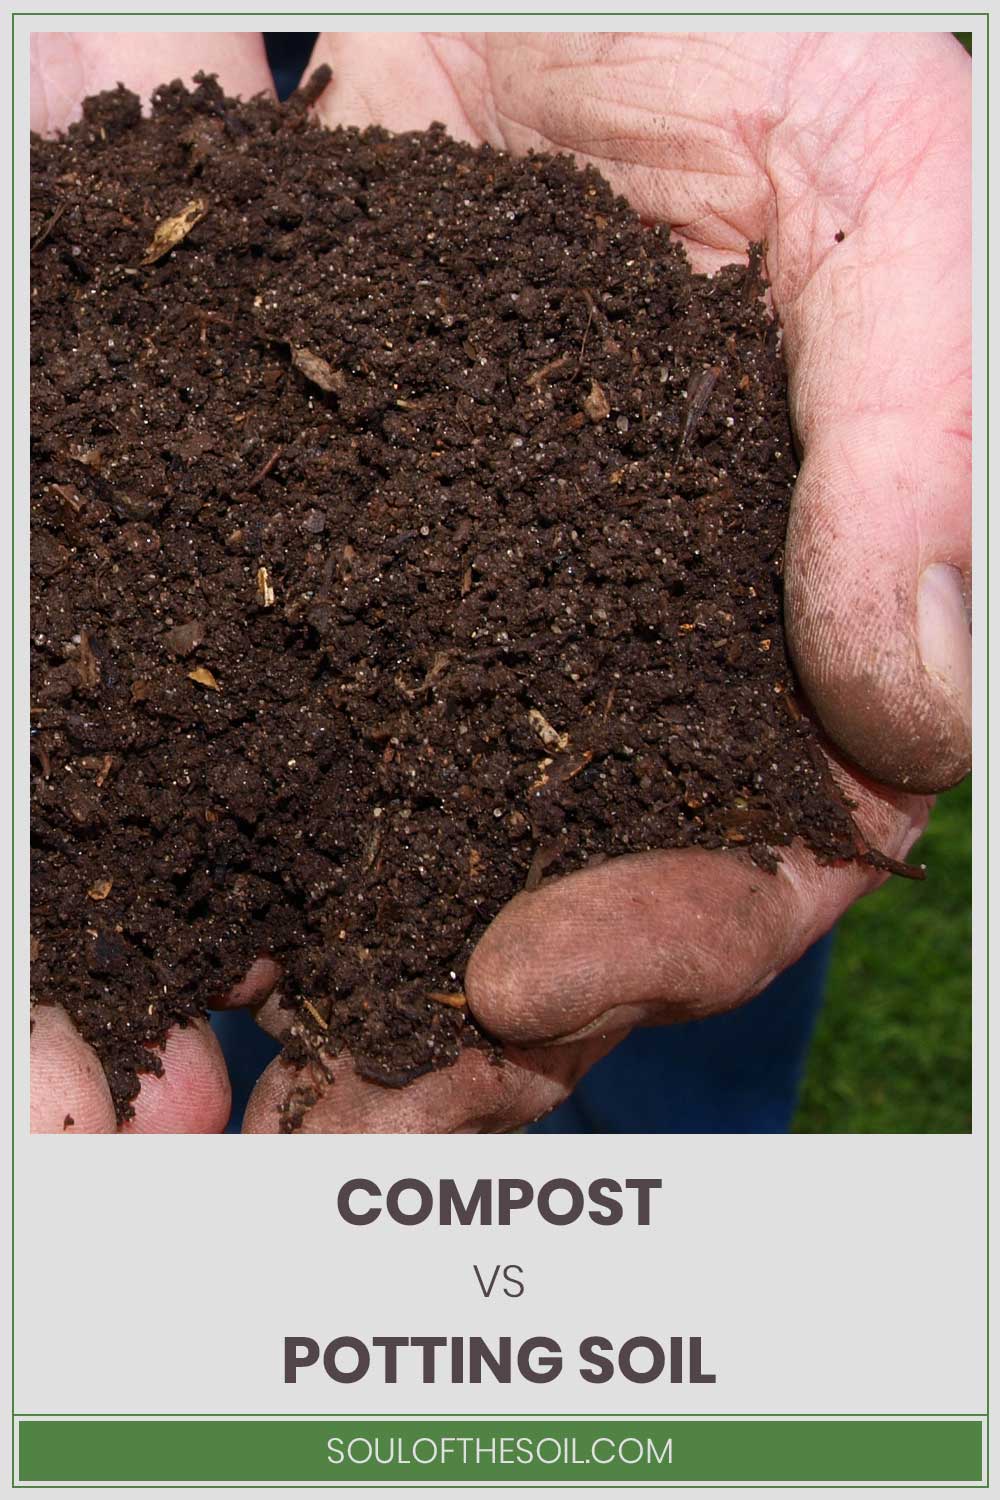 Compost in a person's hands - Compost vs. Potting Soil.